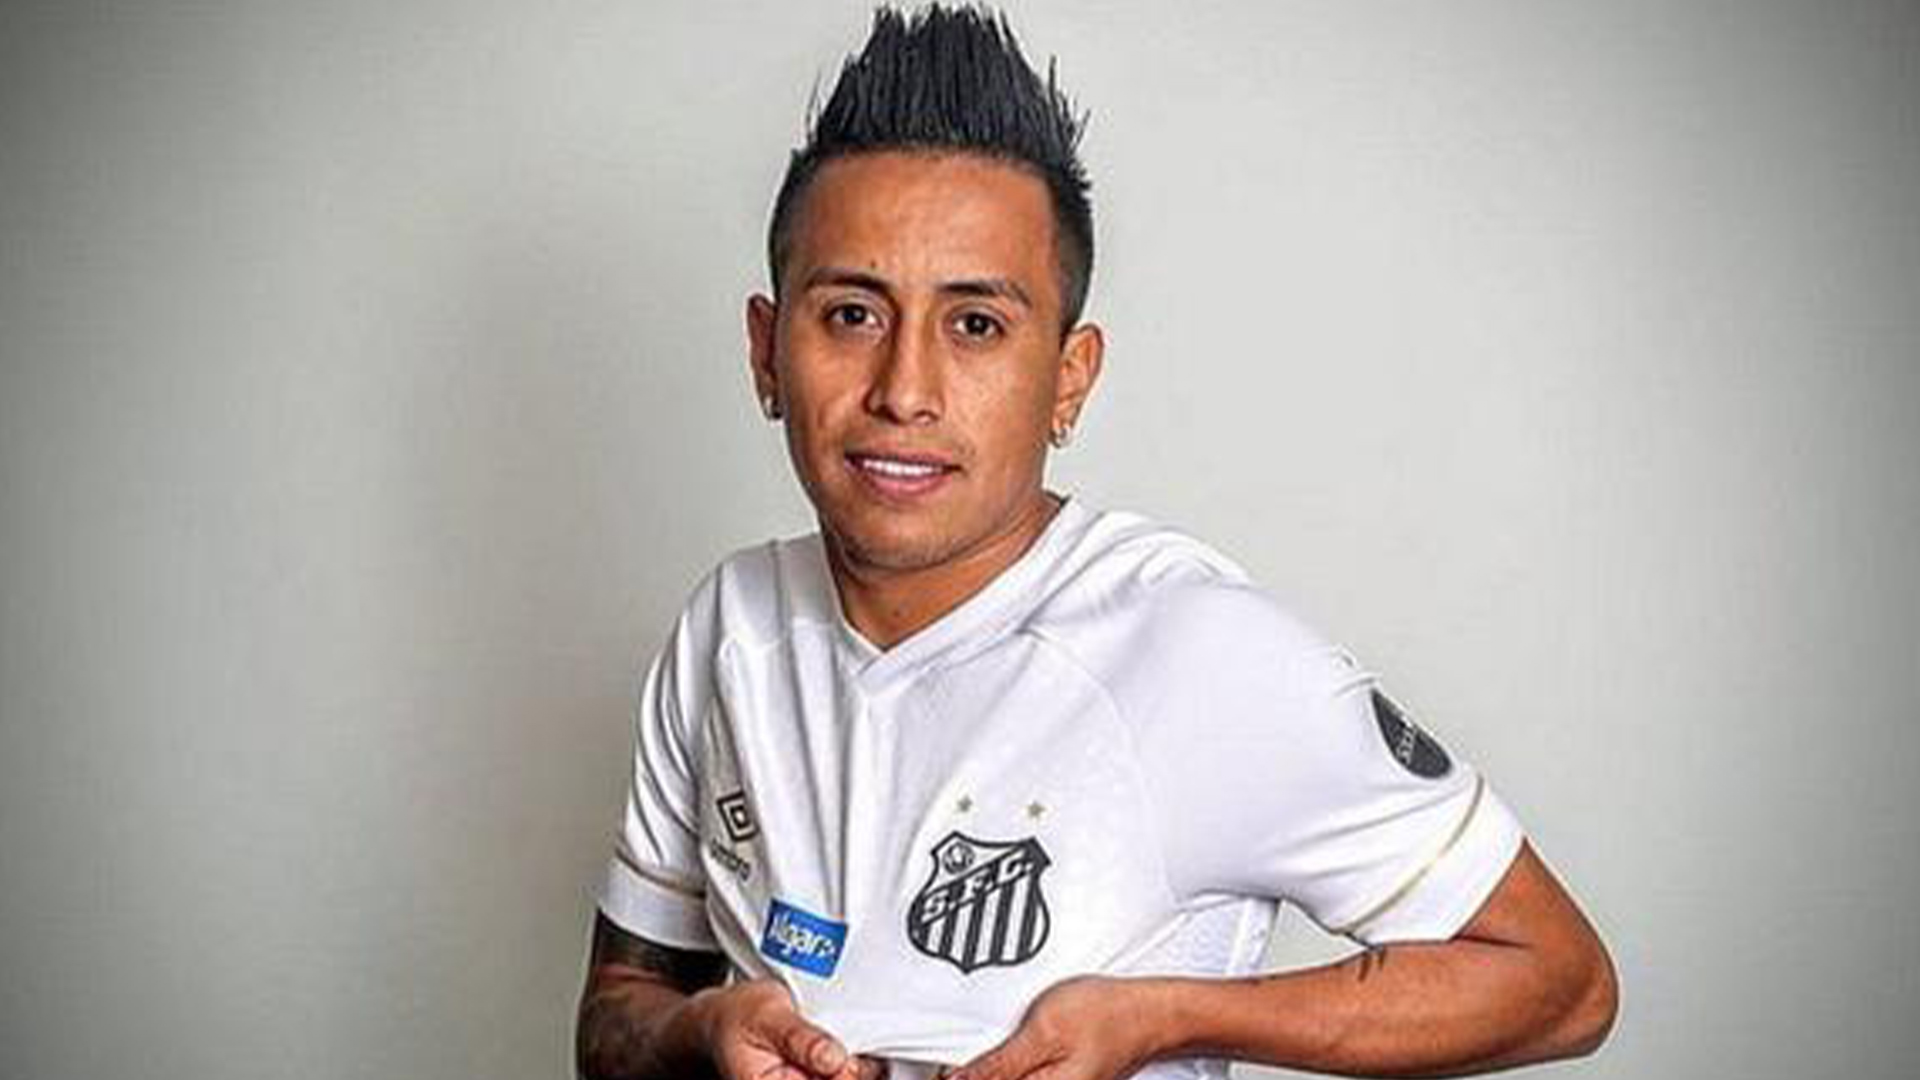 Christian Cueva claimed non-compliance with his payments to terminate his contract with Santos.